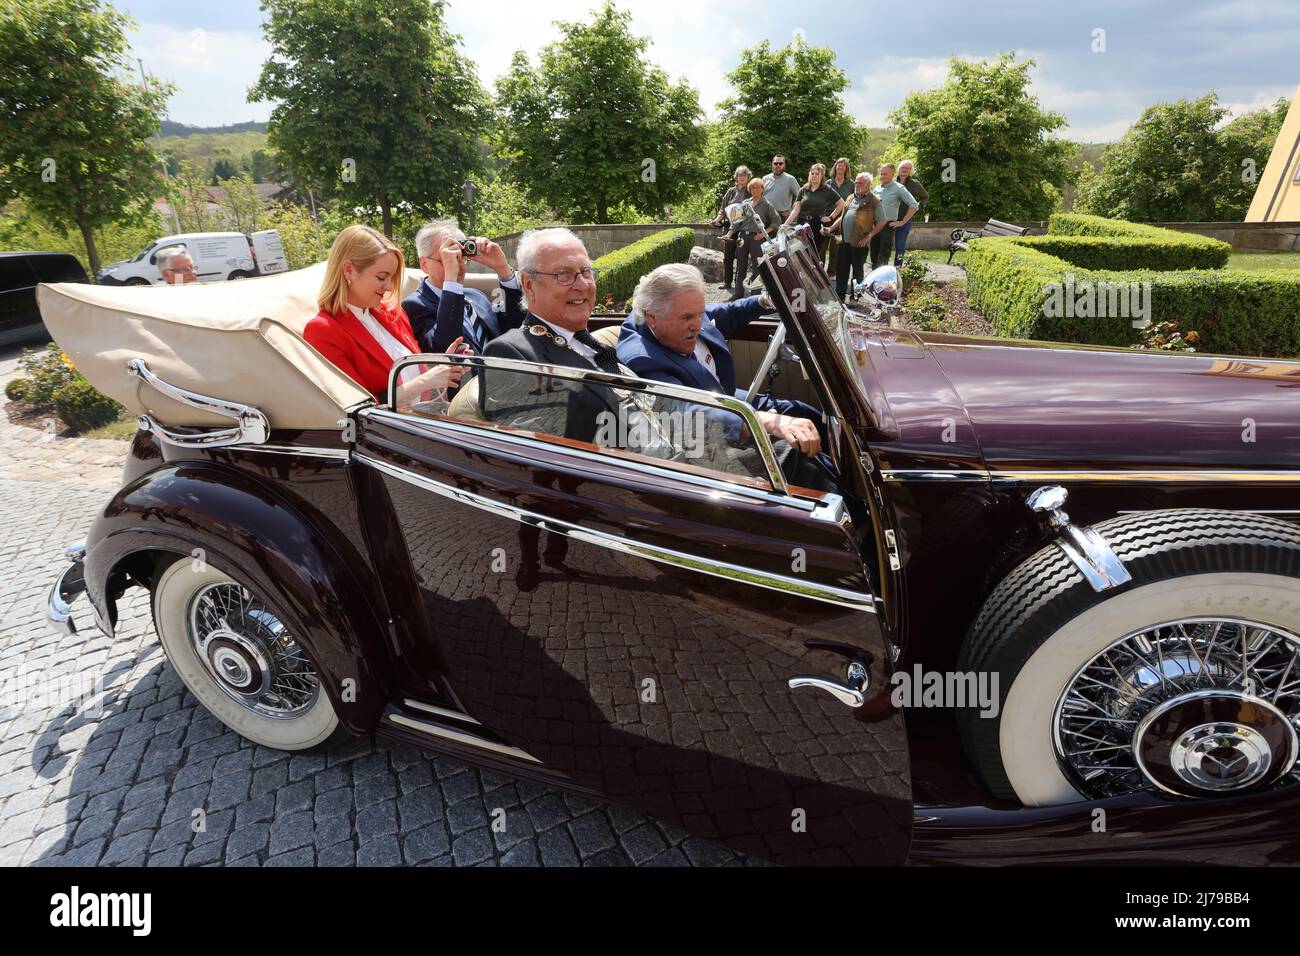 07 May 2022, Saxony-Anhalt, Ballenstedt: Eduard Prince von Anhalt drives up in a vehicle. He celebrates his 80th birthday in Ballenstedt. At the same time also the Investitur took place. In the context of the Investitur annually persons for special achievements of the Askanischen house order 'Albrecht the bear' are honored. The investiture takes place in the presence of Eduard Prince of Anhalt. Photo: Matthias Bein/dpa-Zentralbild/ZB Stock Photo